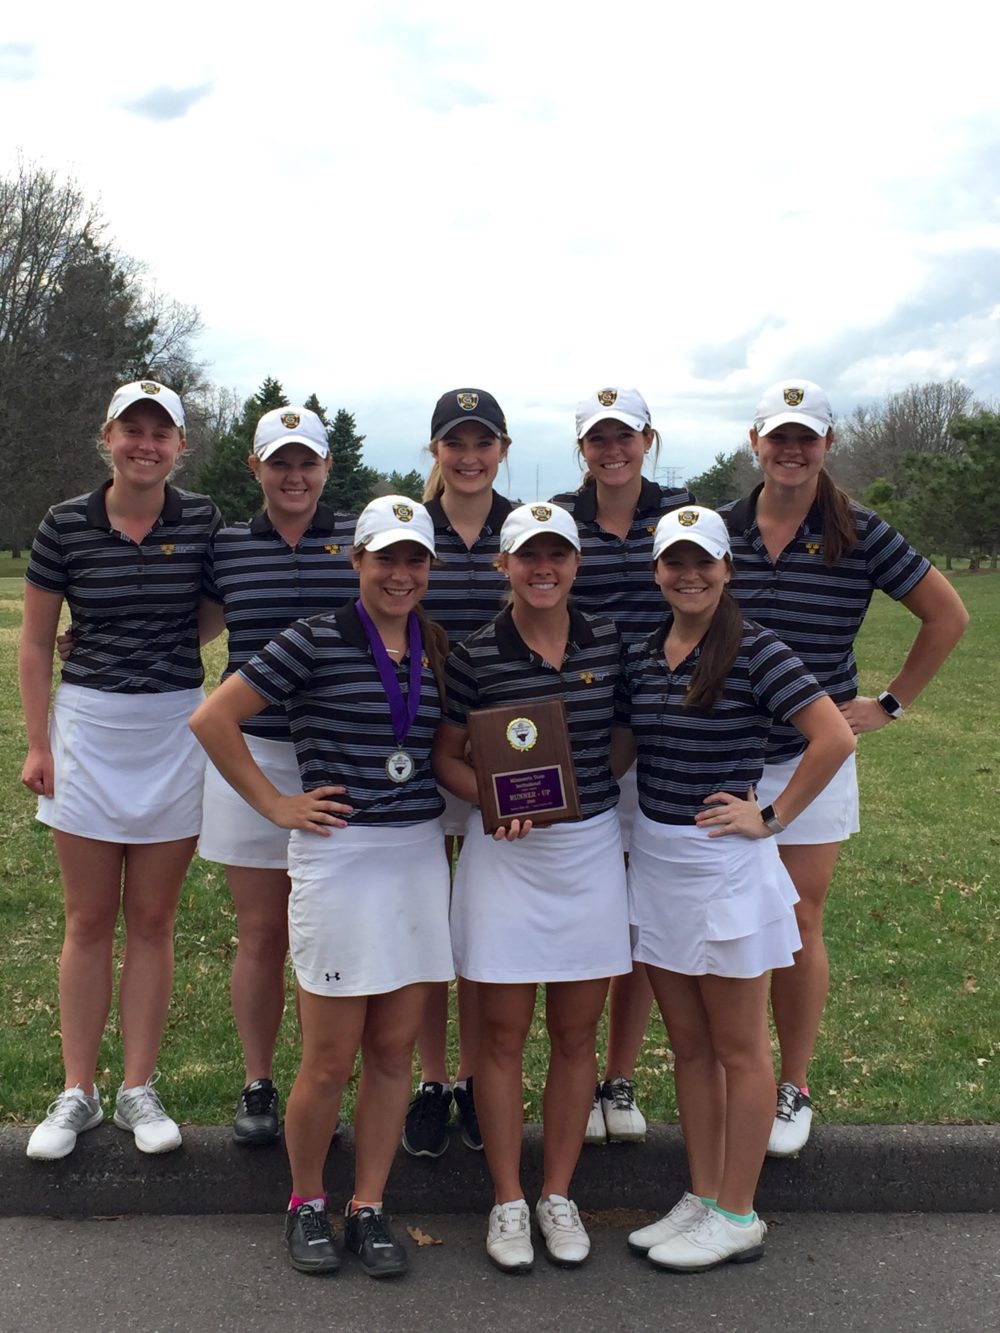 Women’s Golf Takes Second At MNSU Spring Invite - Posted on April 17th